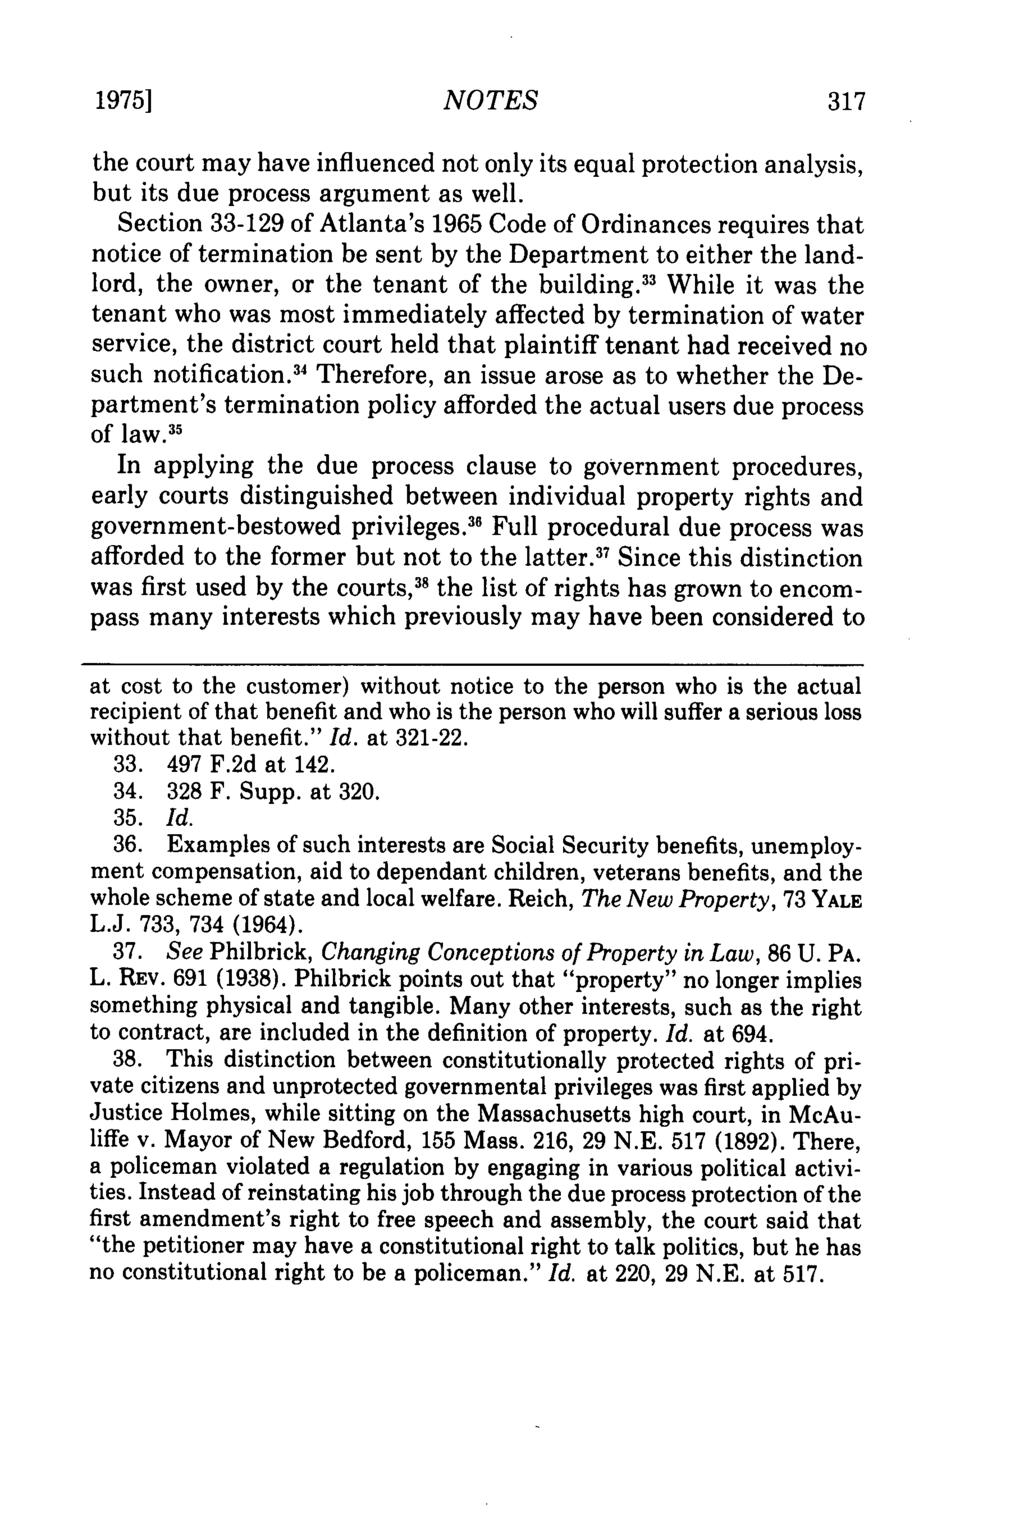 1975] NOTES the court may have influenced not only its equal protection analysis, but its due process argument as well.